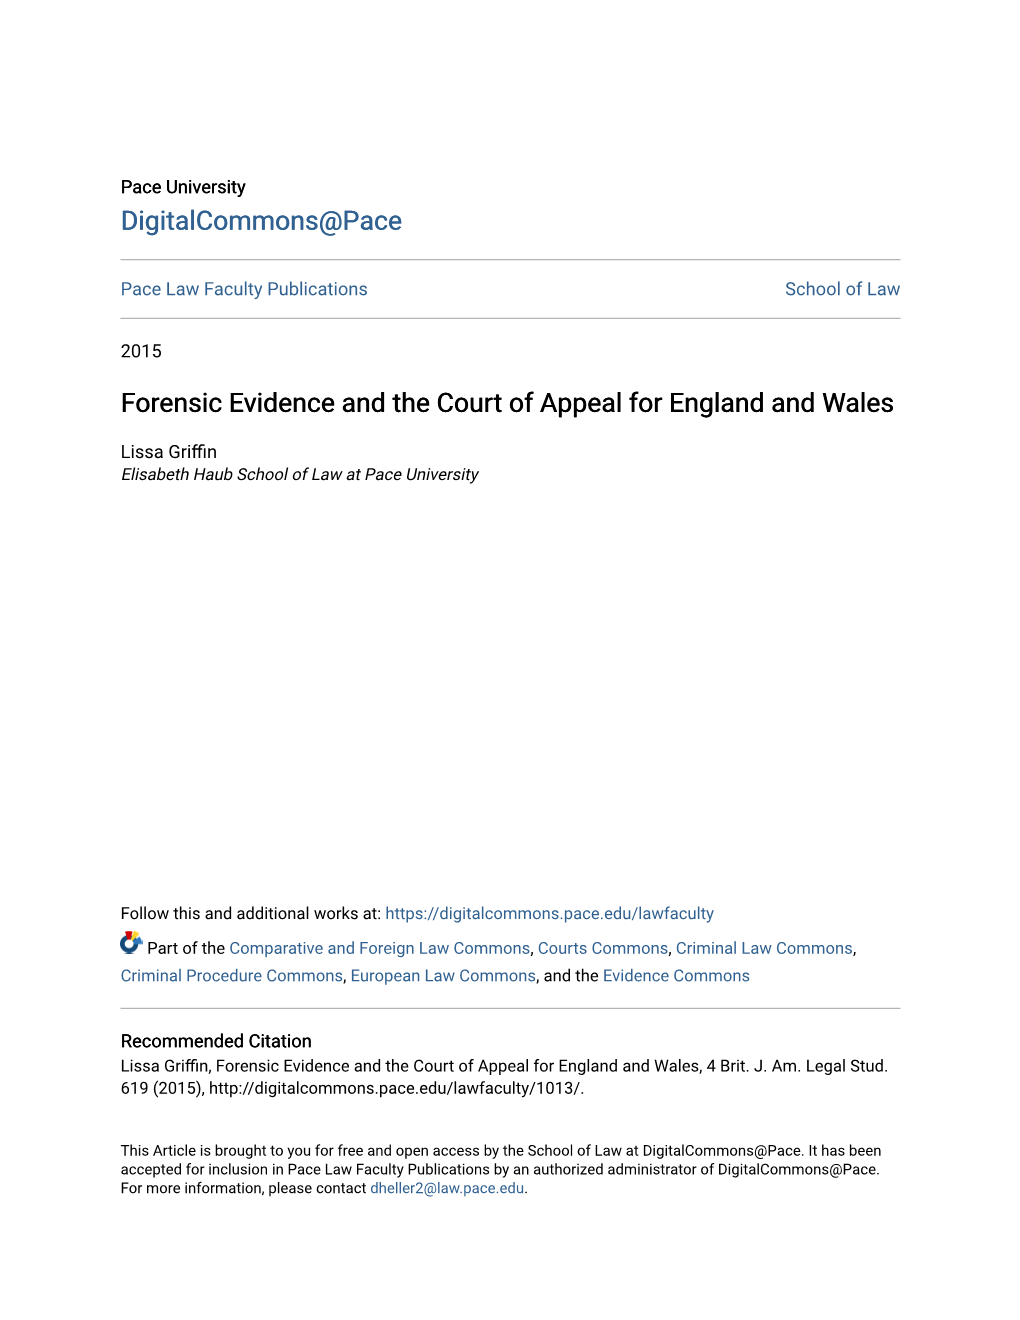 Forensic Evidence and the Court of Appeal for England and Wales